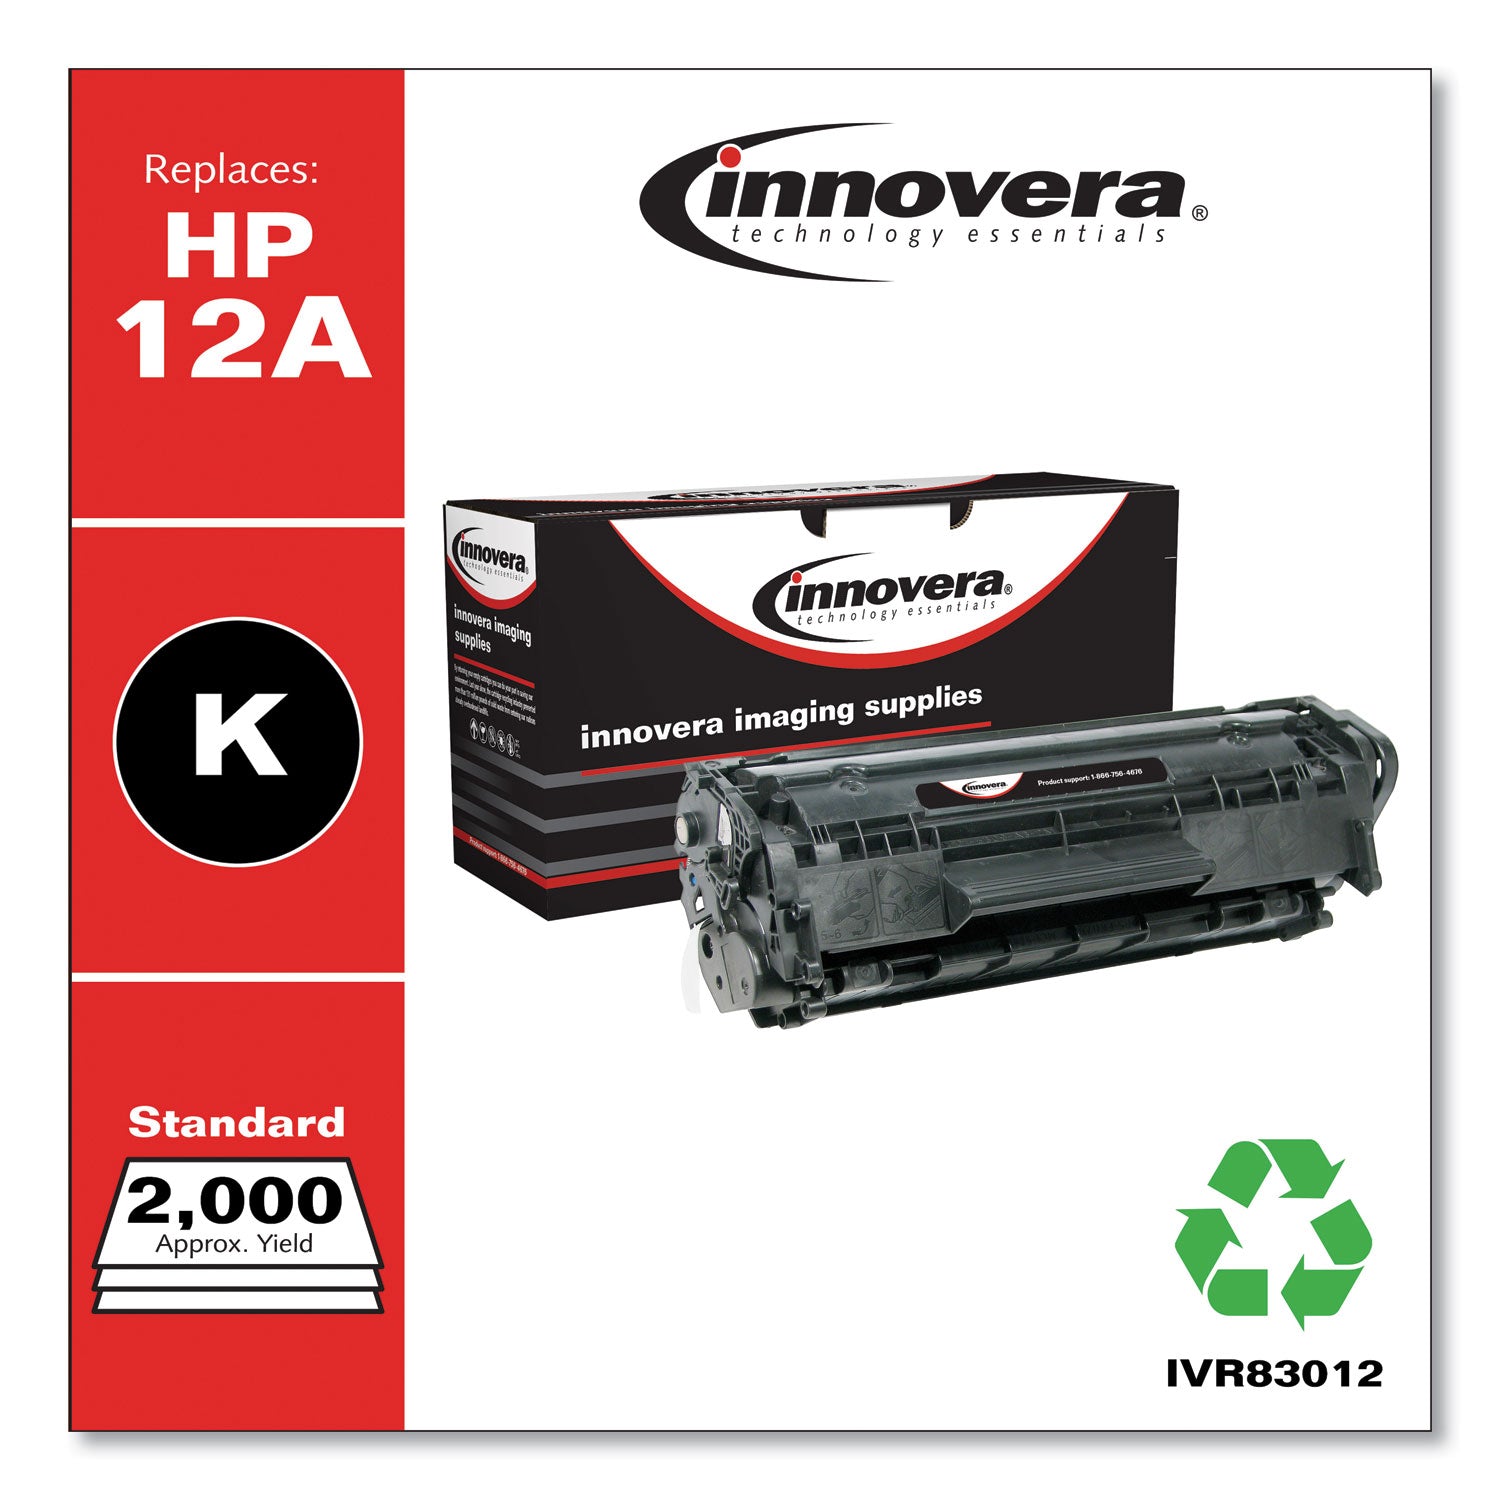 Remanufactured Black Toner, Replacement for 12A (Q2612A), 2,000 Page-Yield - 